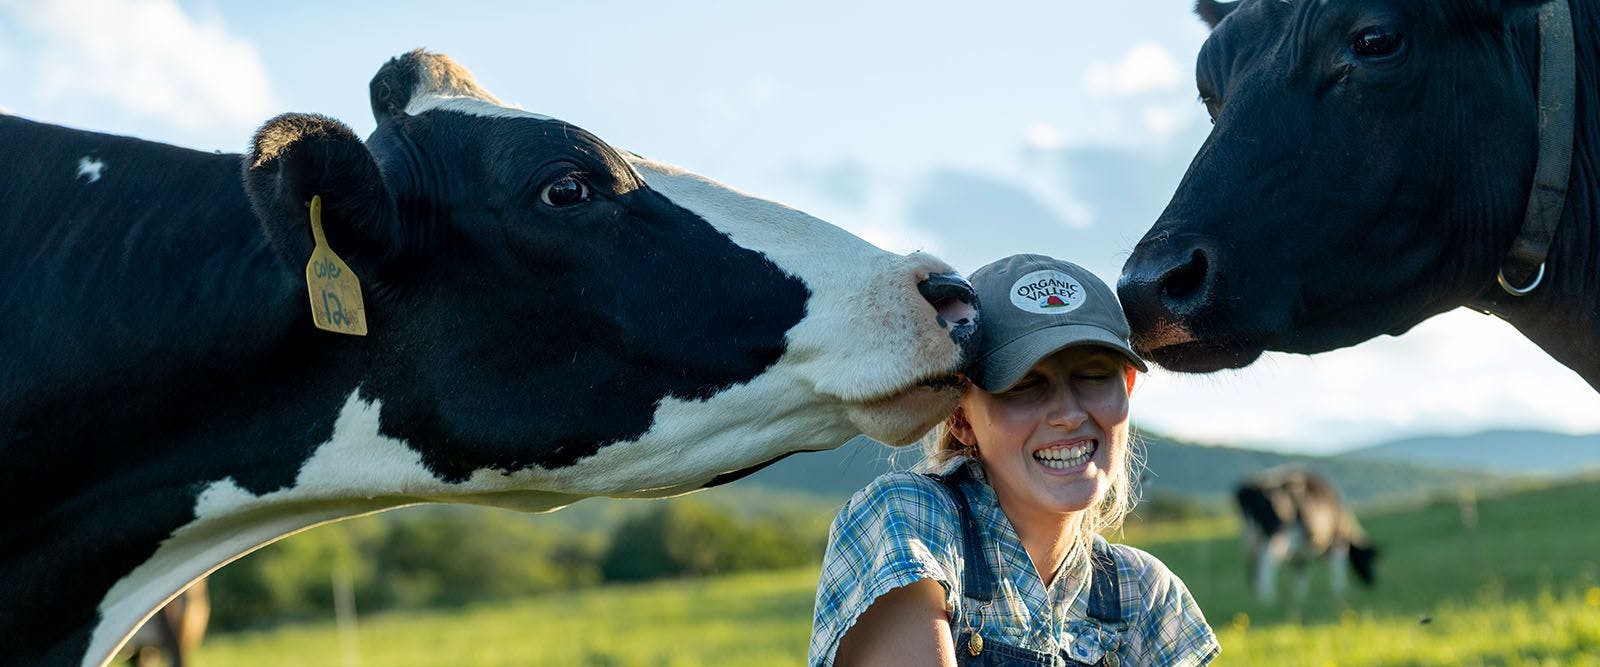 Cow kisses at the Rooney family farm in Vermont.